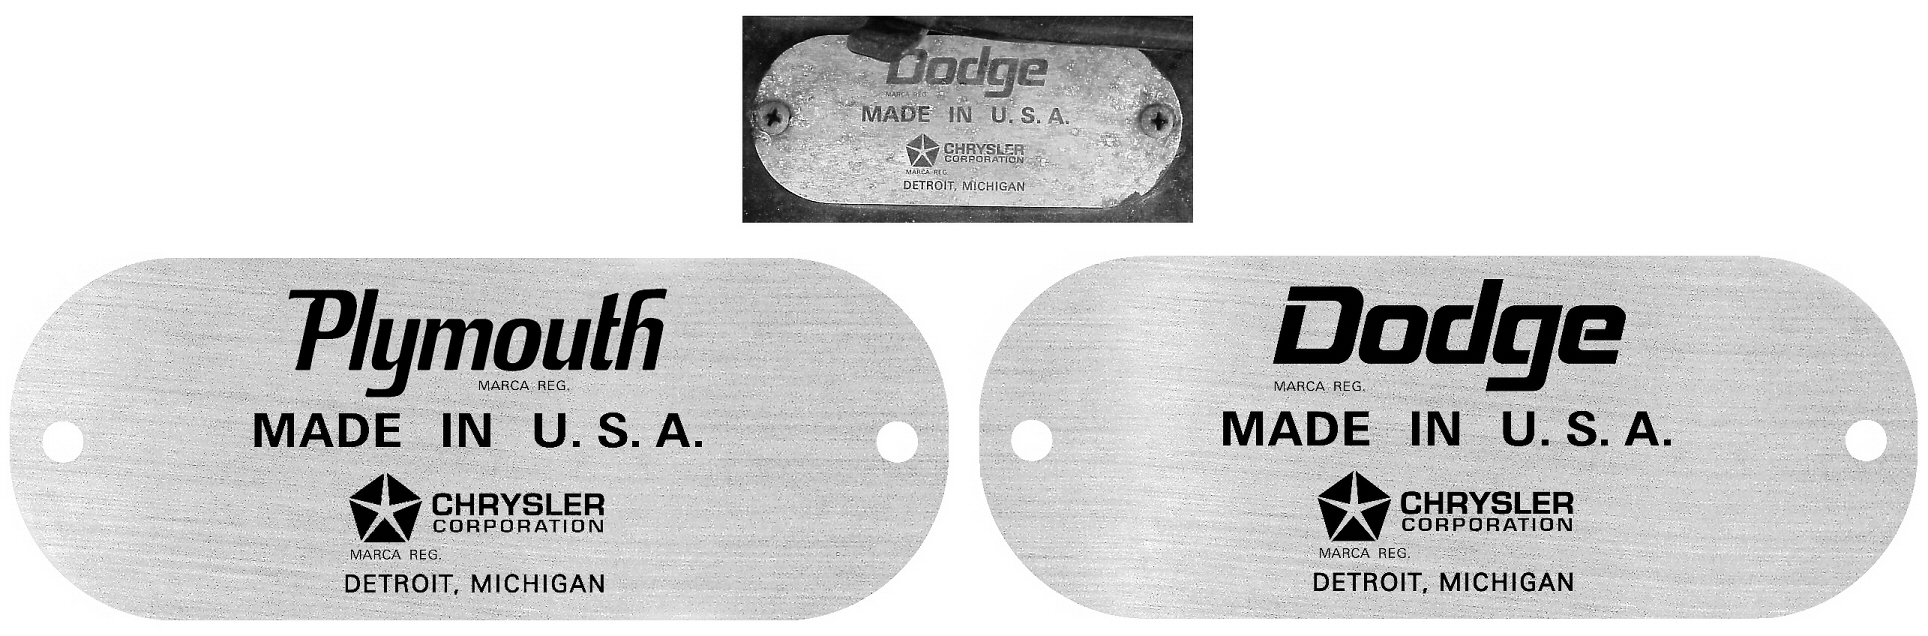 Plymouth, Dodge Fender Export Plate Tags